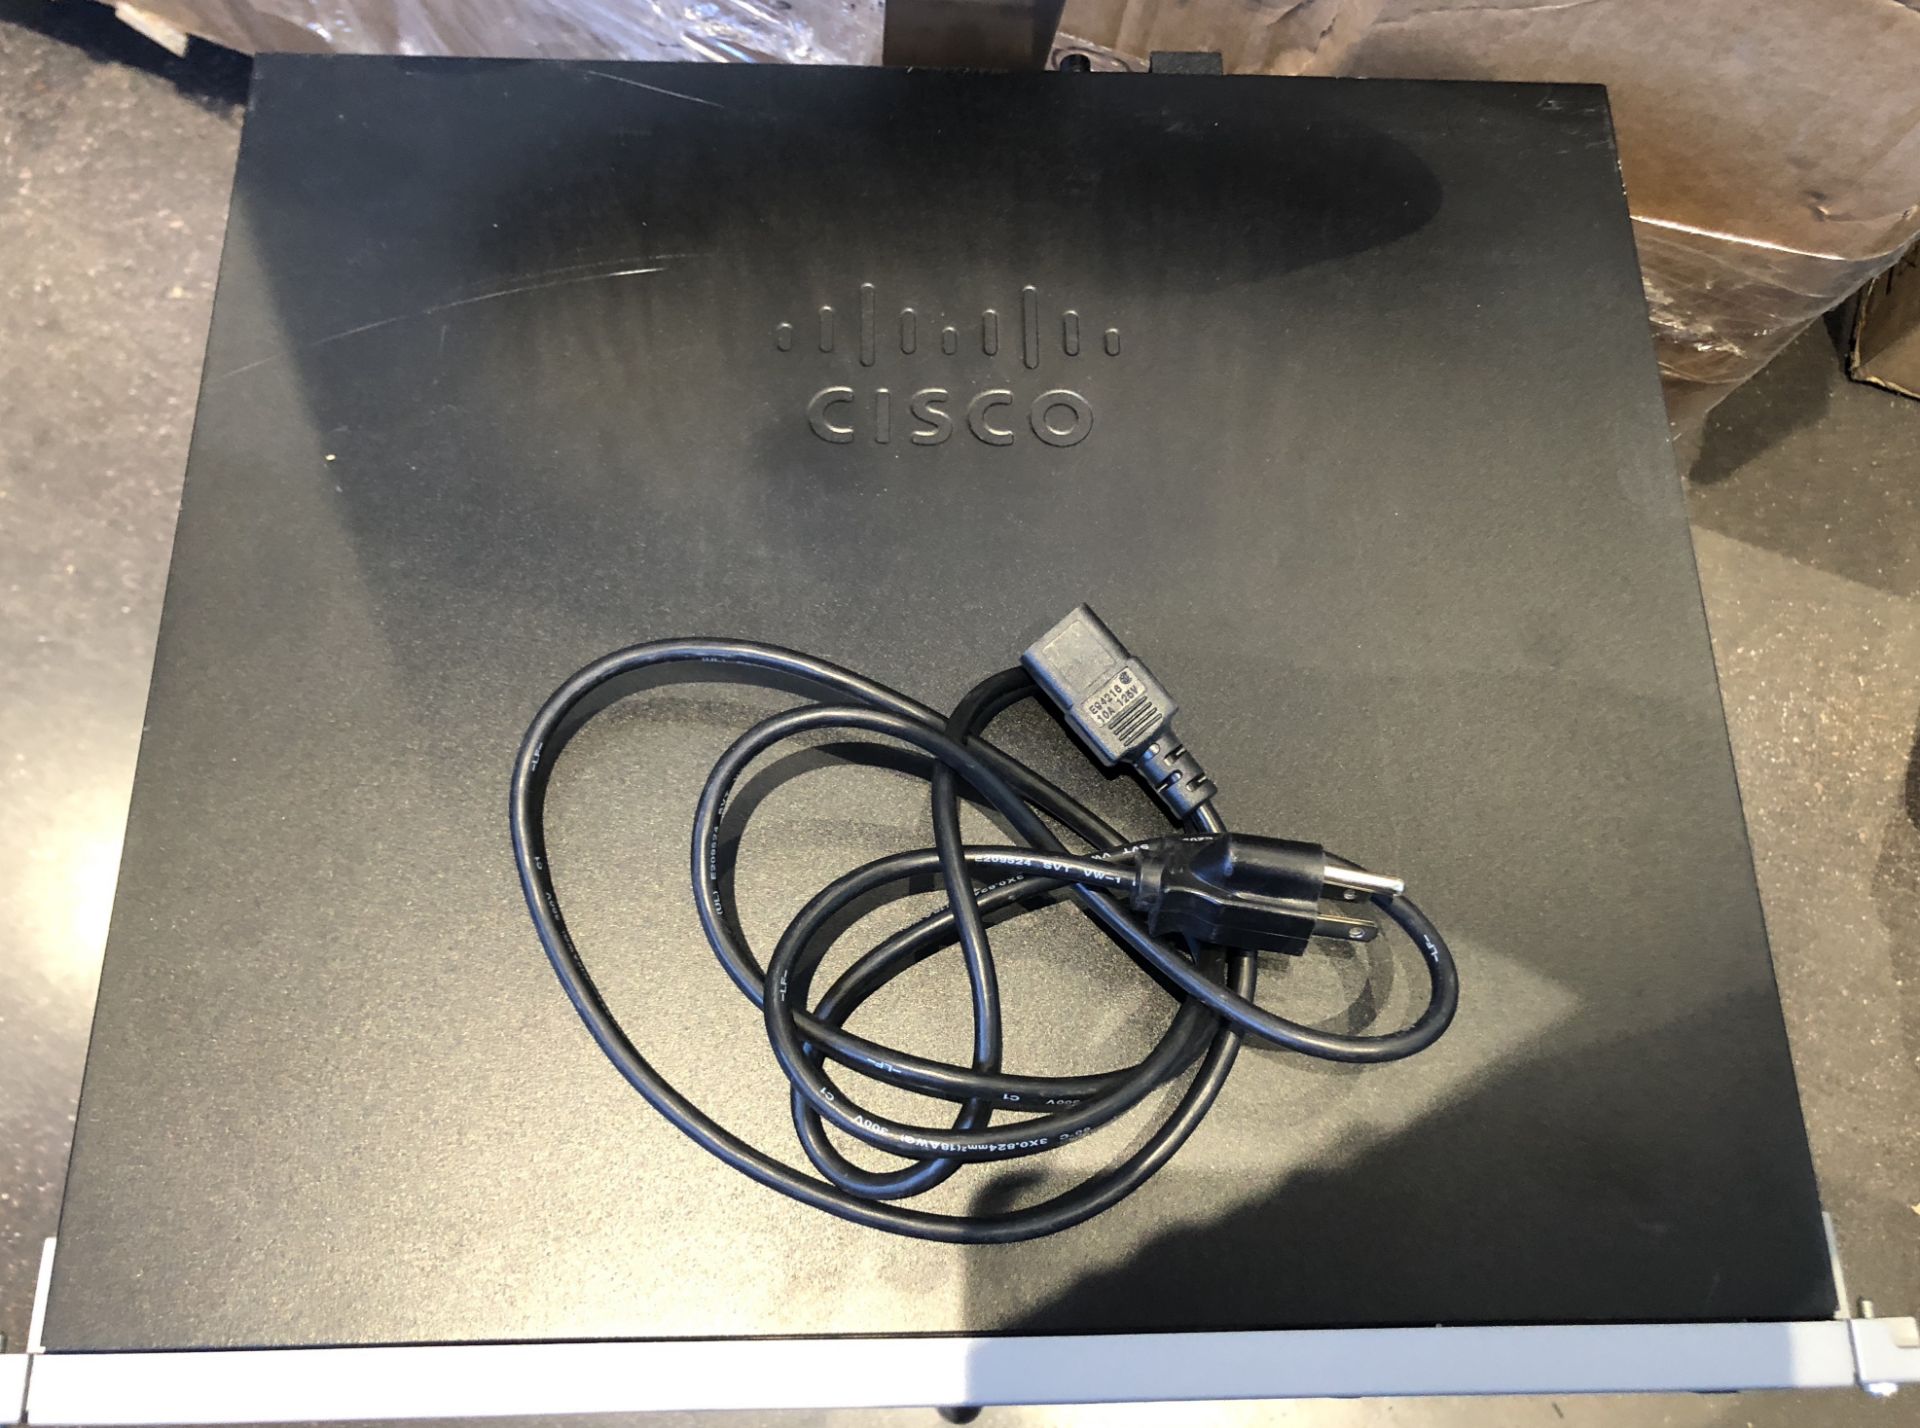 CISCO S170 WEB SECURITY APPLIANCE NETWORK EQUIPMENT - Image 2 of 4